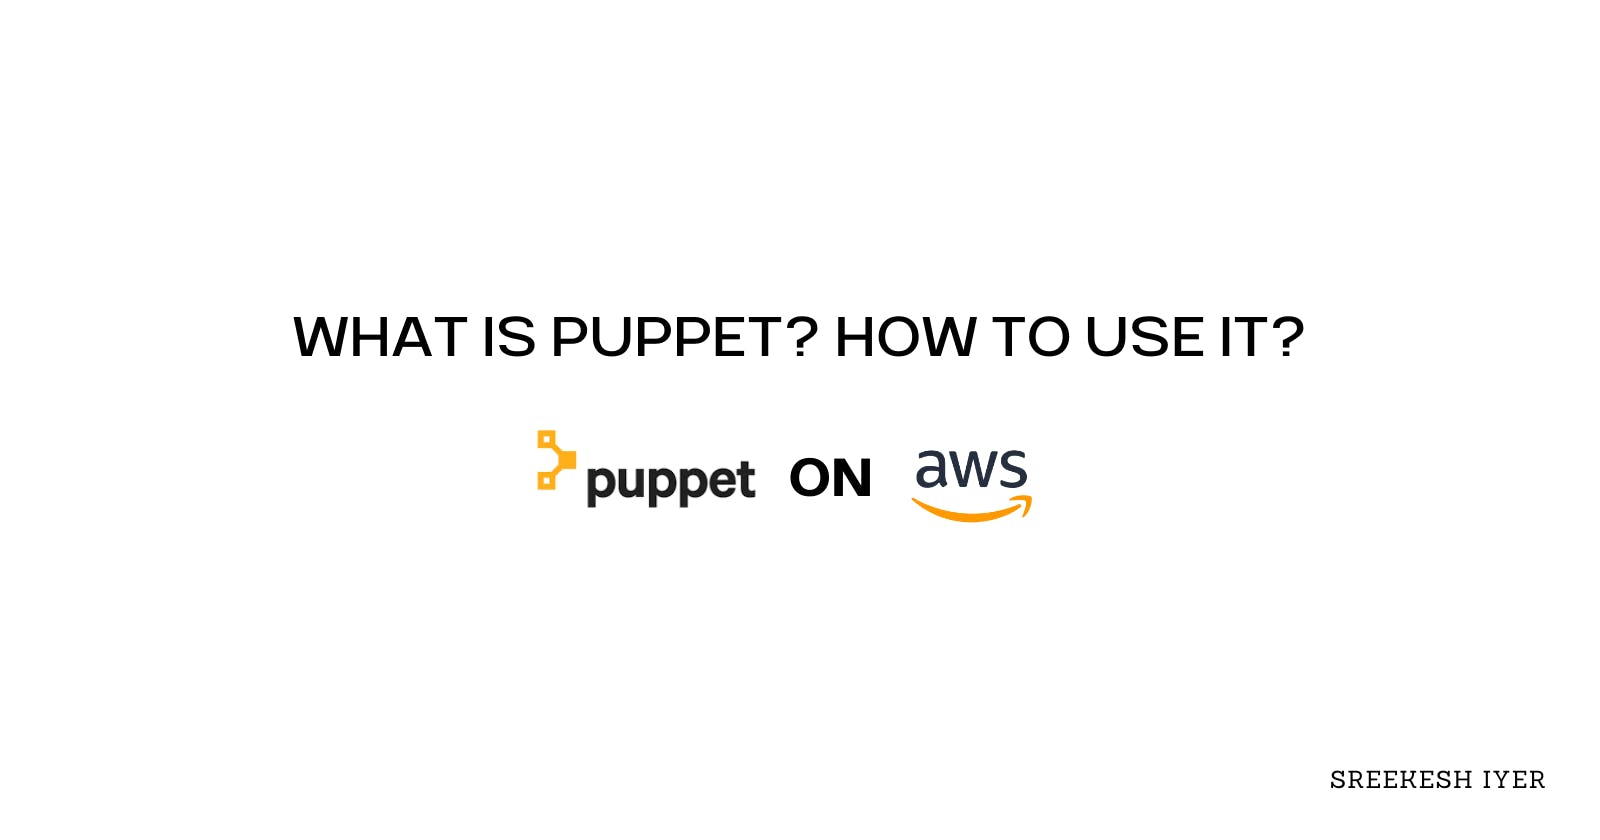 What is Puppet? Why is it used?